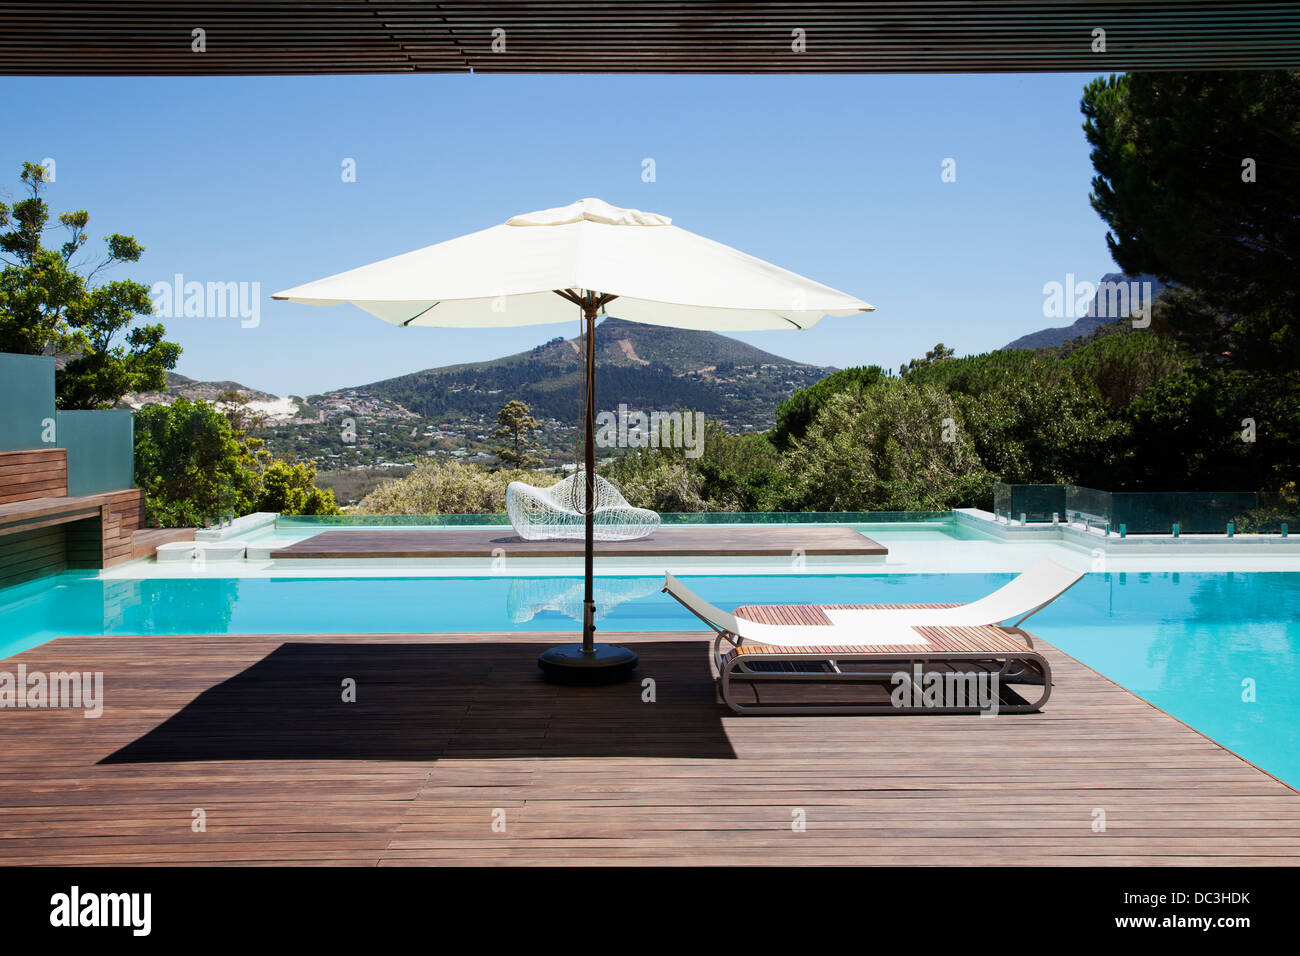 Swimming pool overlooking mountains Stock Photo